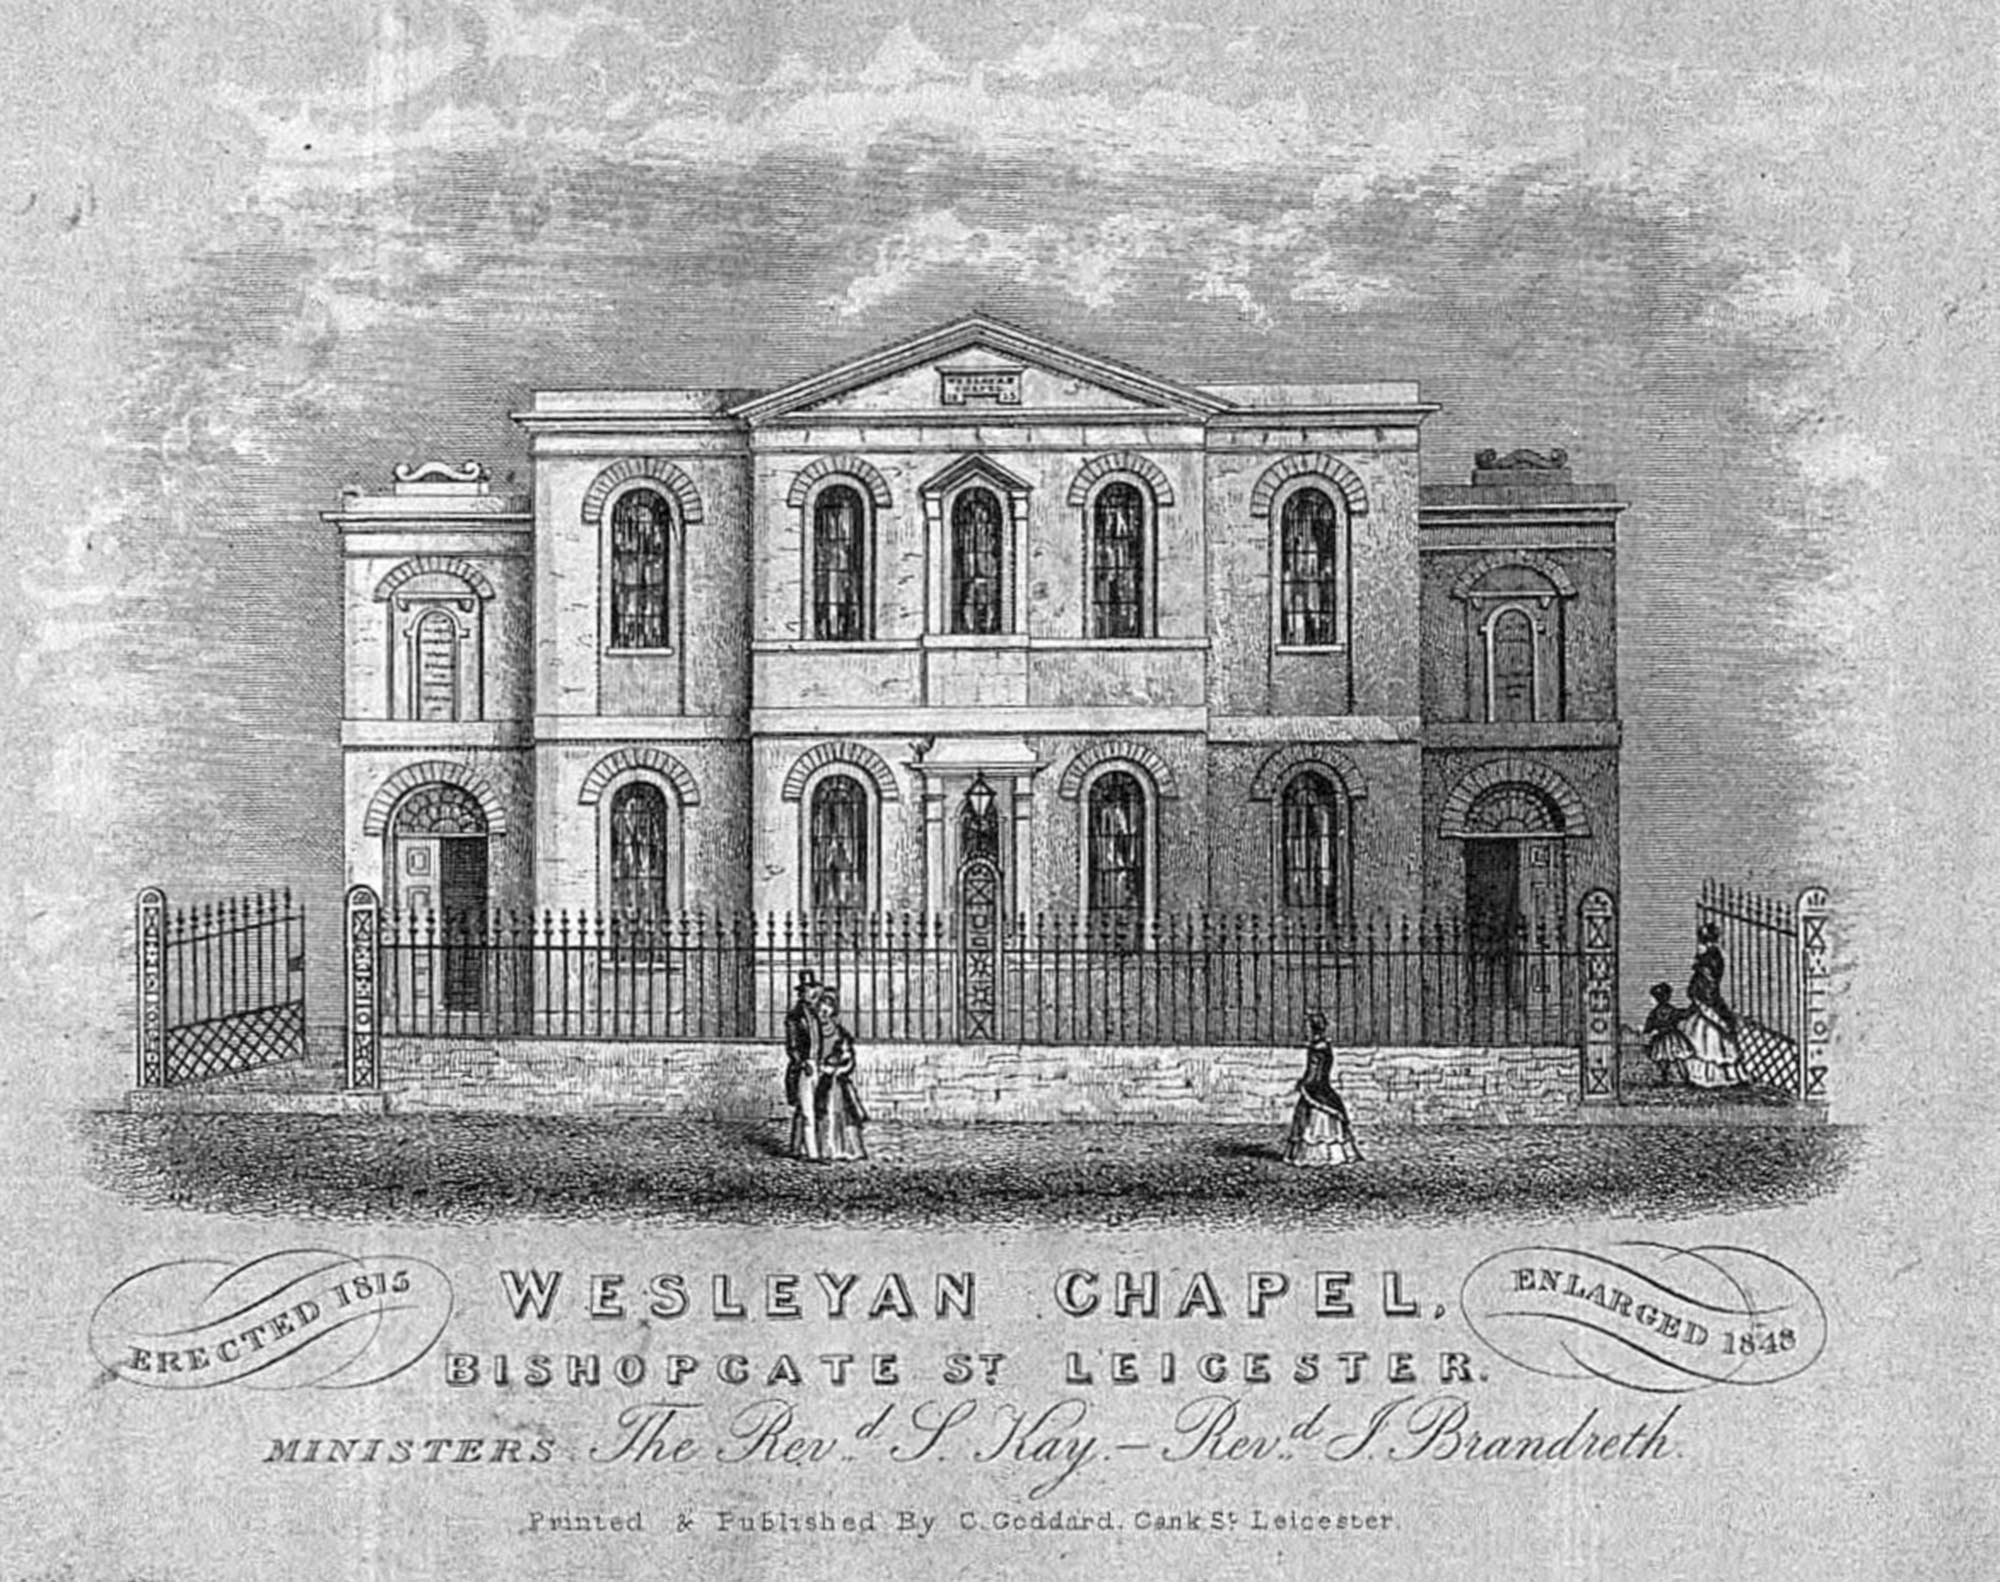 An engraving of the chapel printed by C. Goddard of Cank Street, Leicester, post 1848 - Leicestershire Record Office